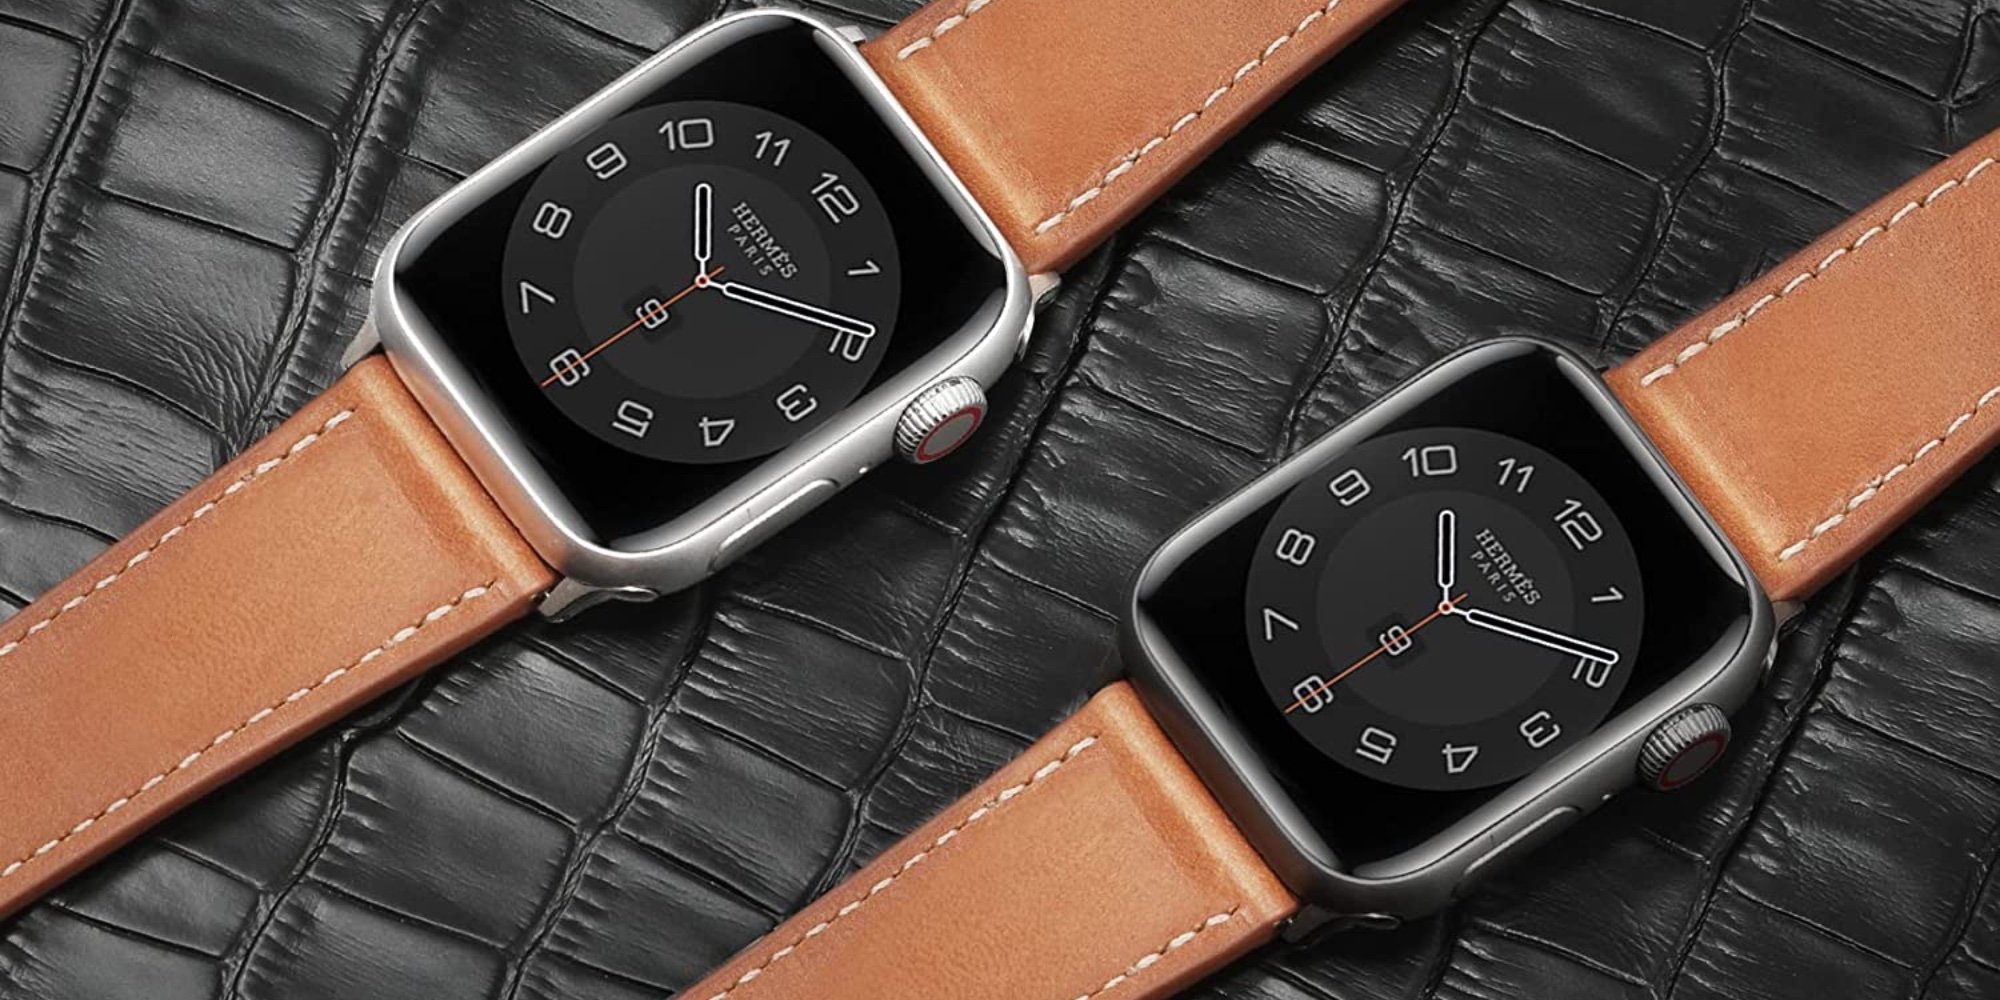 Pair your Apple Watch with this genuine leather band at just $8.50 ...